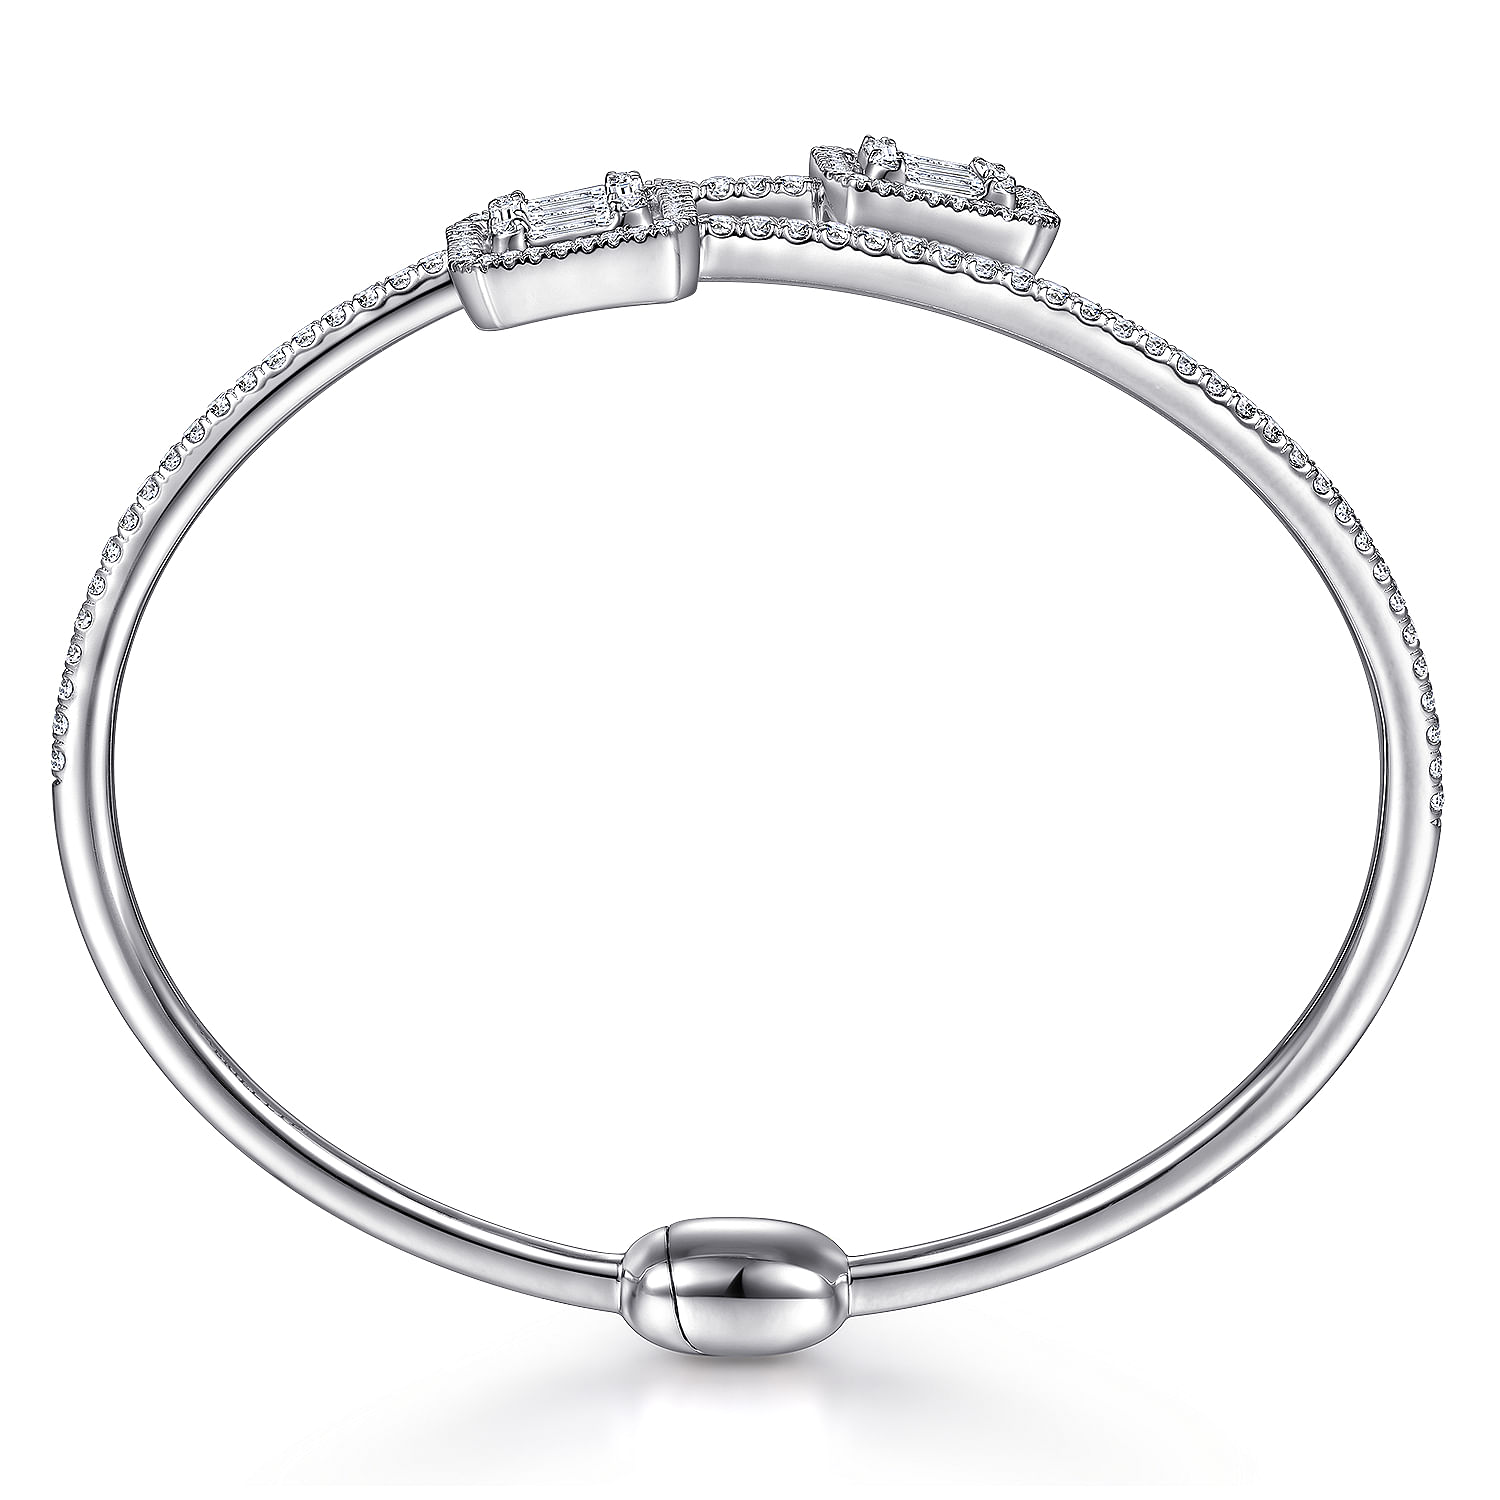 18K White Gold Bypass Bangle with Baguette and Round Diamonds